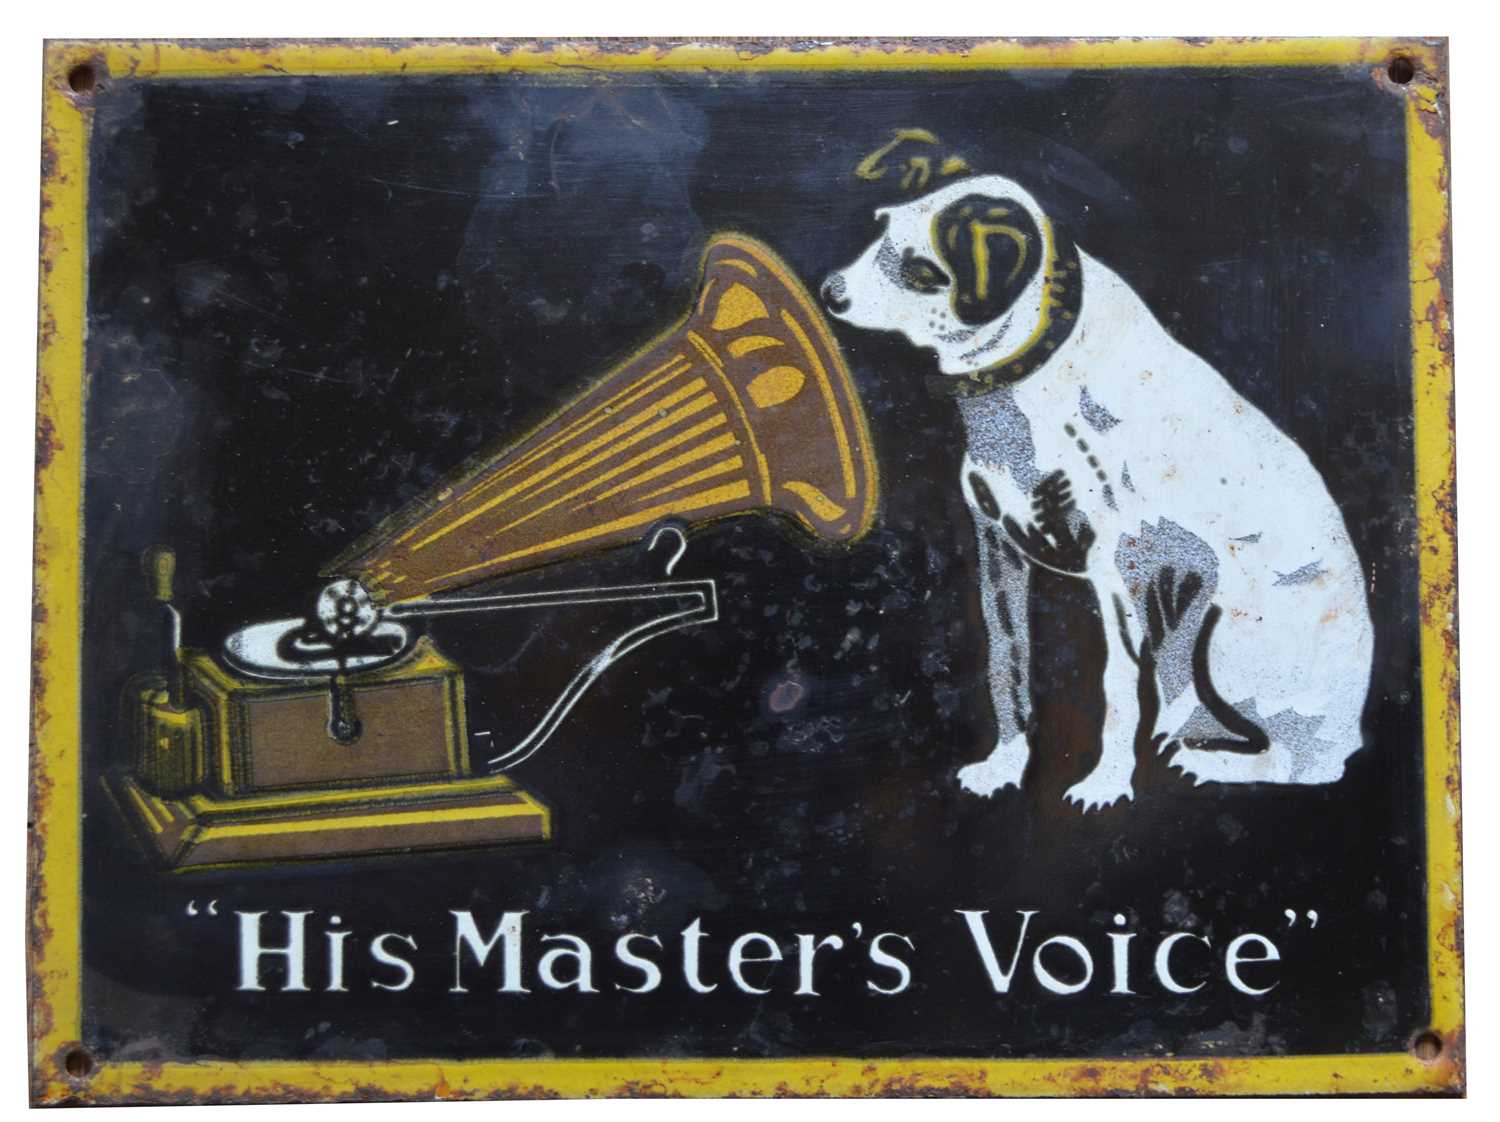 Lot 784 - His Master's Voice enamel advertising sign